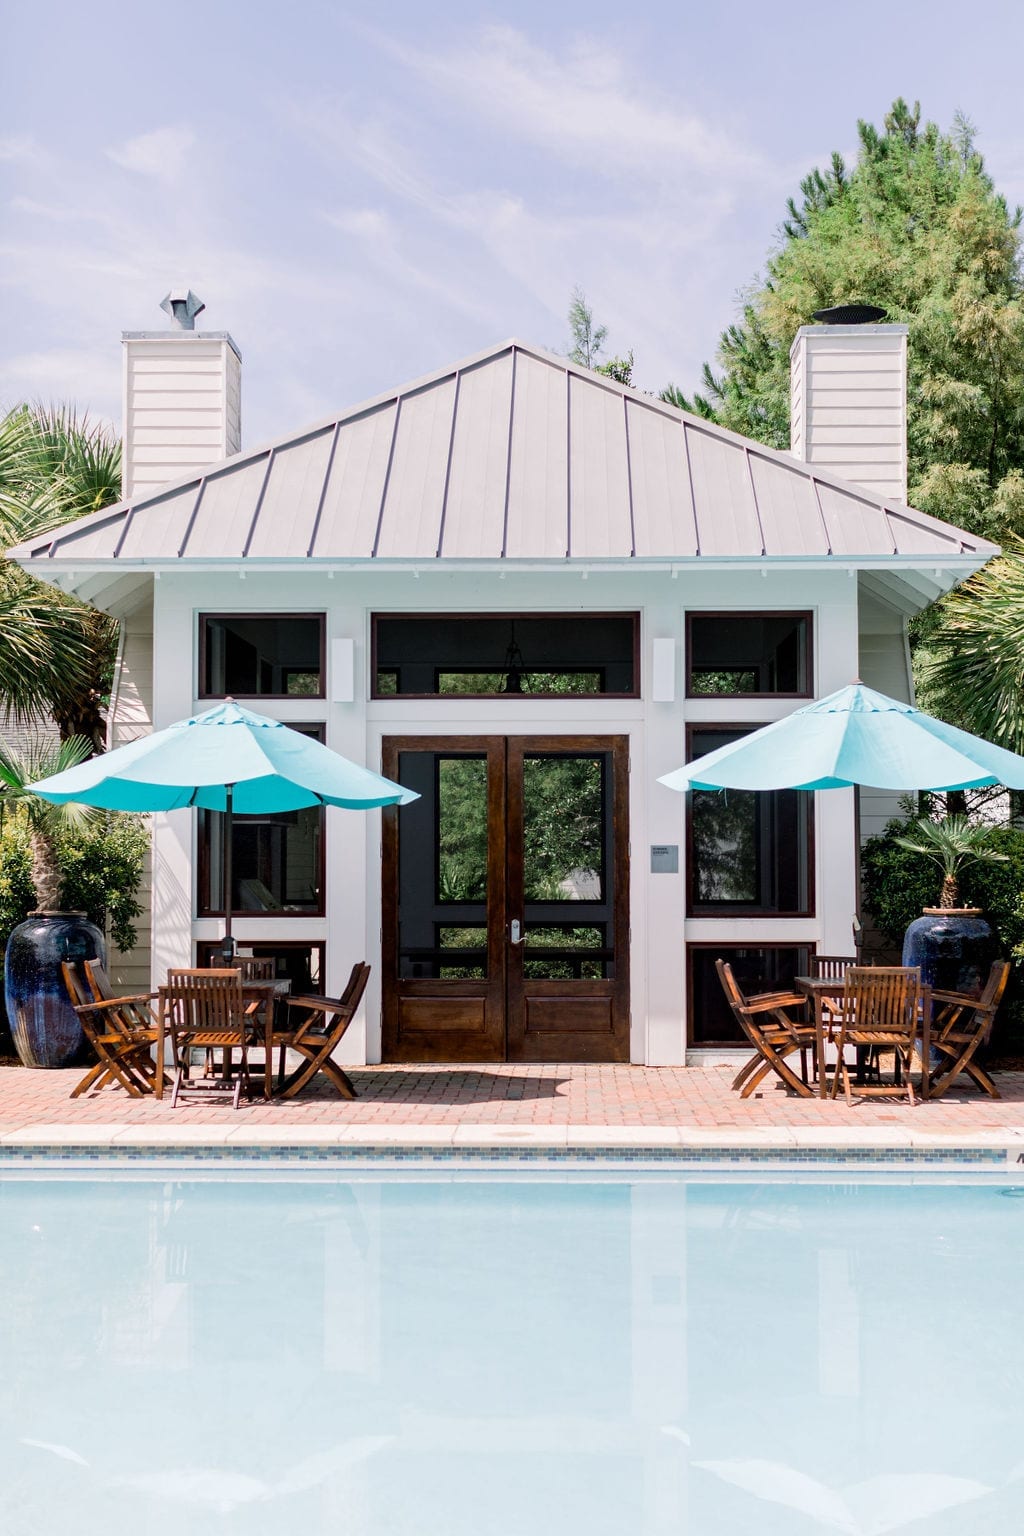 A summer kitchen makes for this pool house in white with dark stained doors. The teak furniture has bright blue outdoor umbrellas.